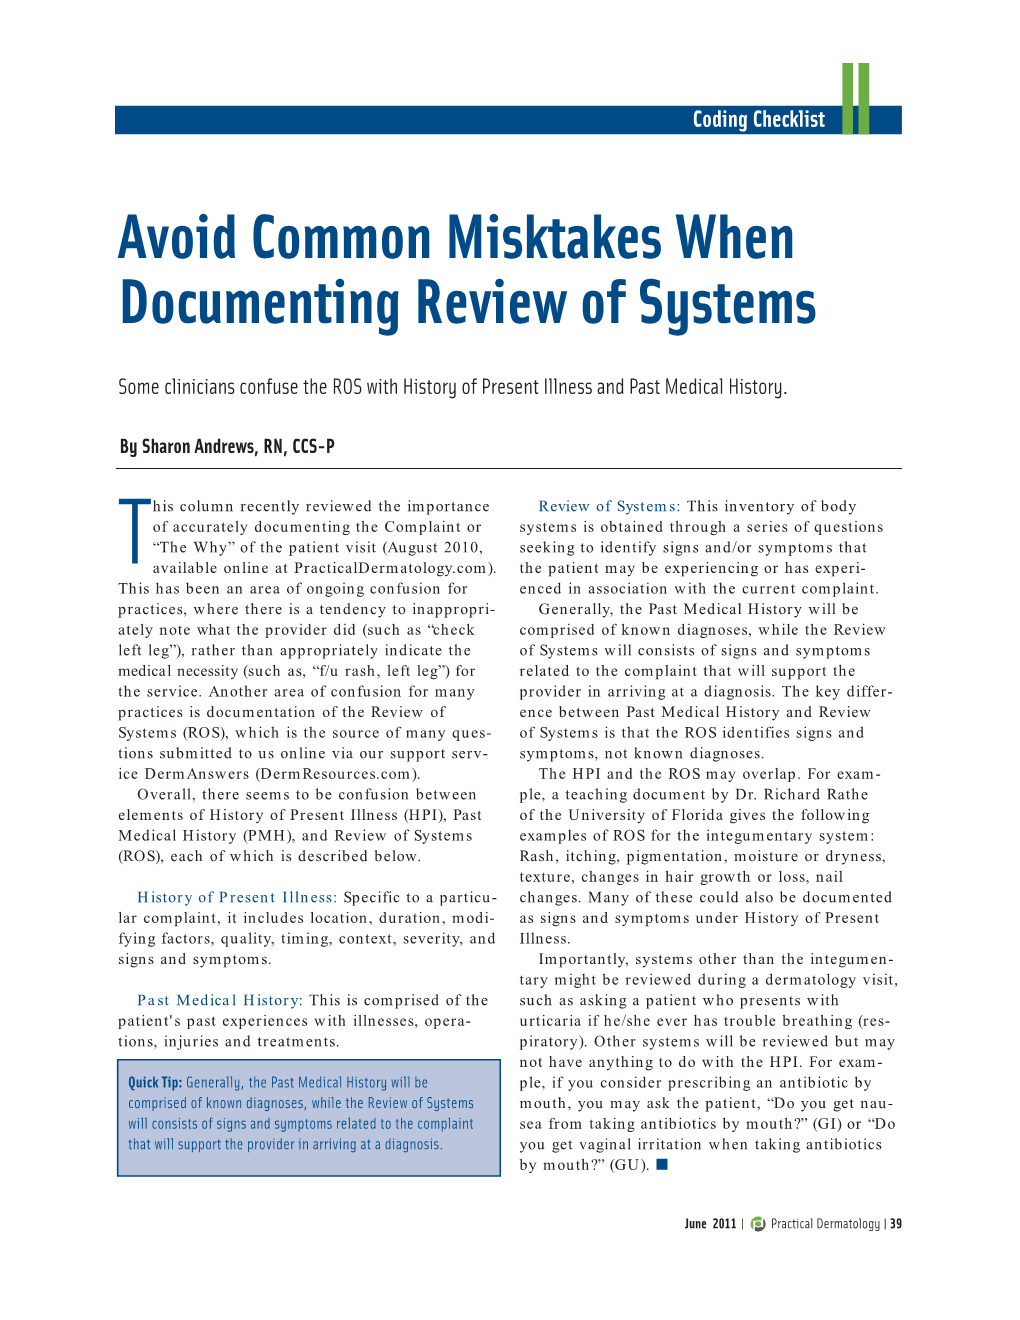 Avoid Common Misktakes When Documenting Review of Systems